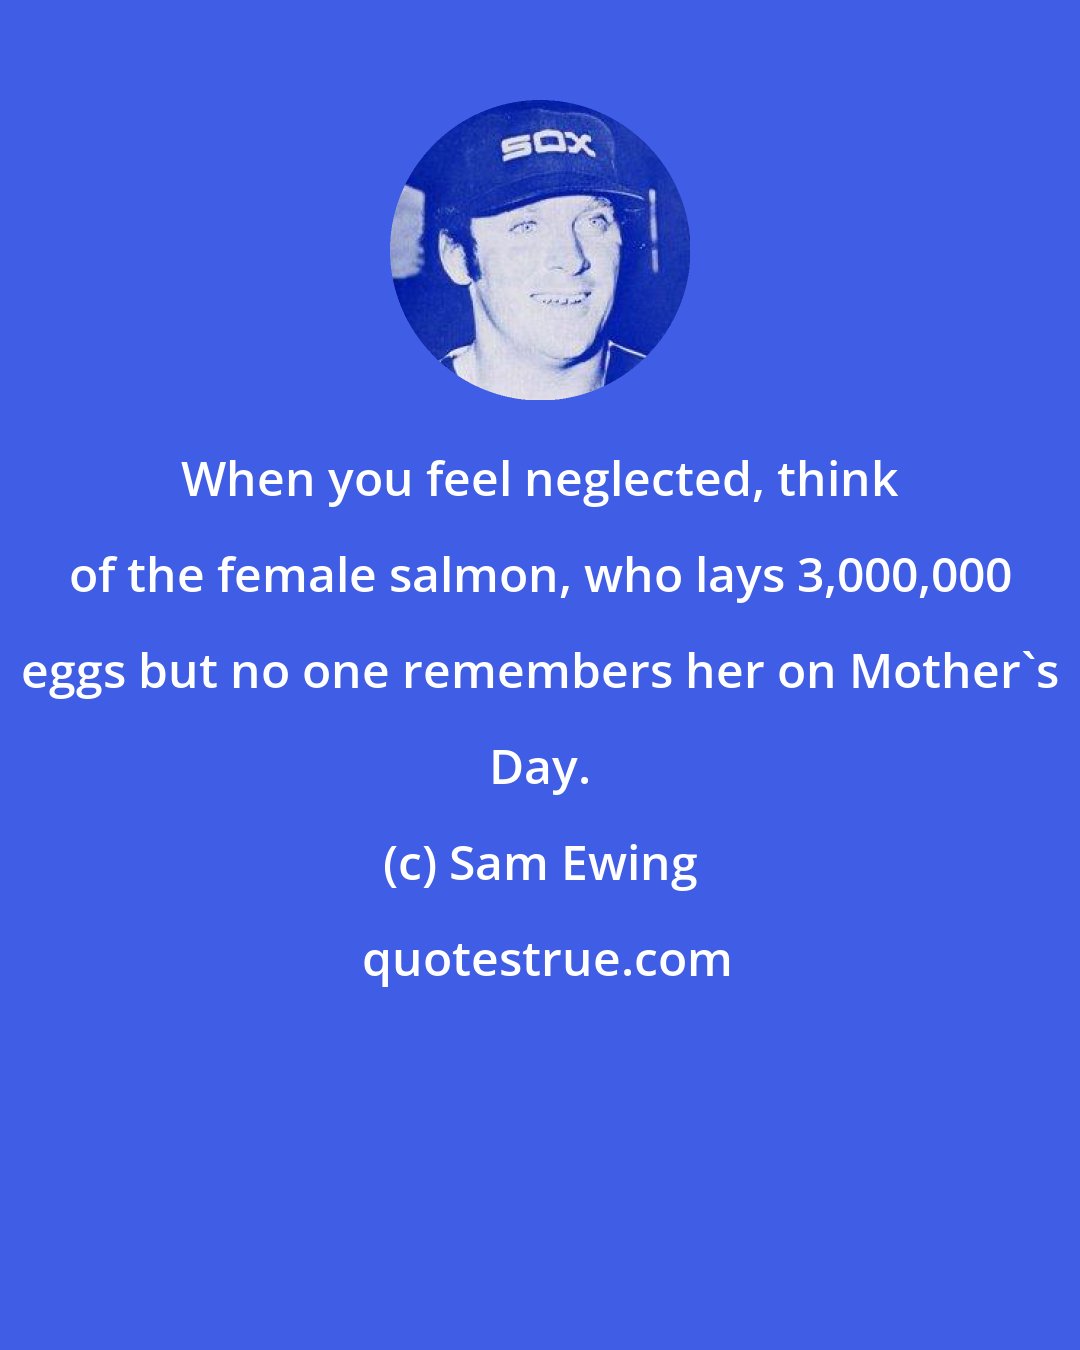 Sam Ewing: When you feel neglected, think of the female salmon, who lays 3,000,000 eggs but no one remembers her on Mother's Day.